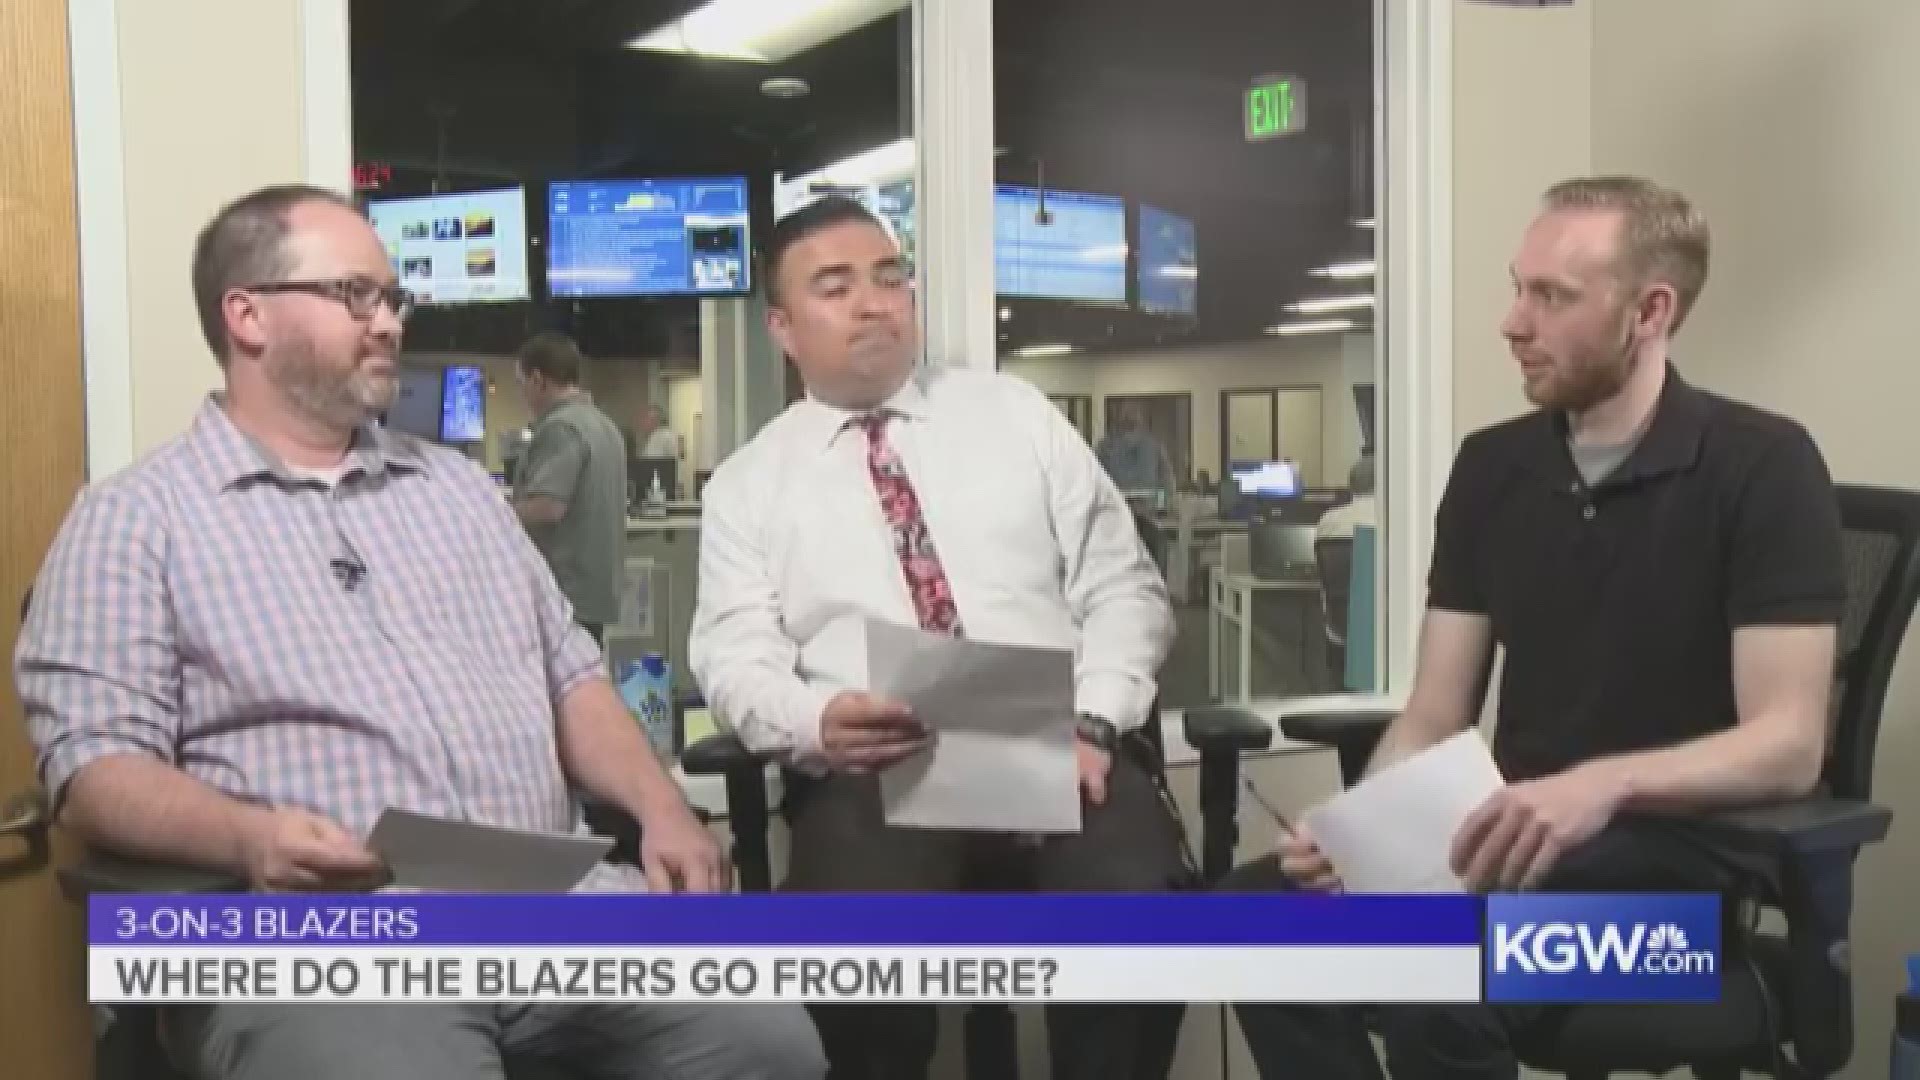 After another first-round playoff sweep, is it time for the Portland Trail Blazers to make major changes? KGW's Jared Cowley, Orlando Sanchez and Nate Hanson debate.